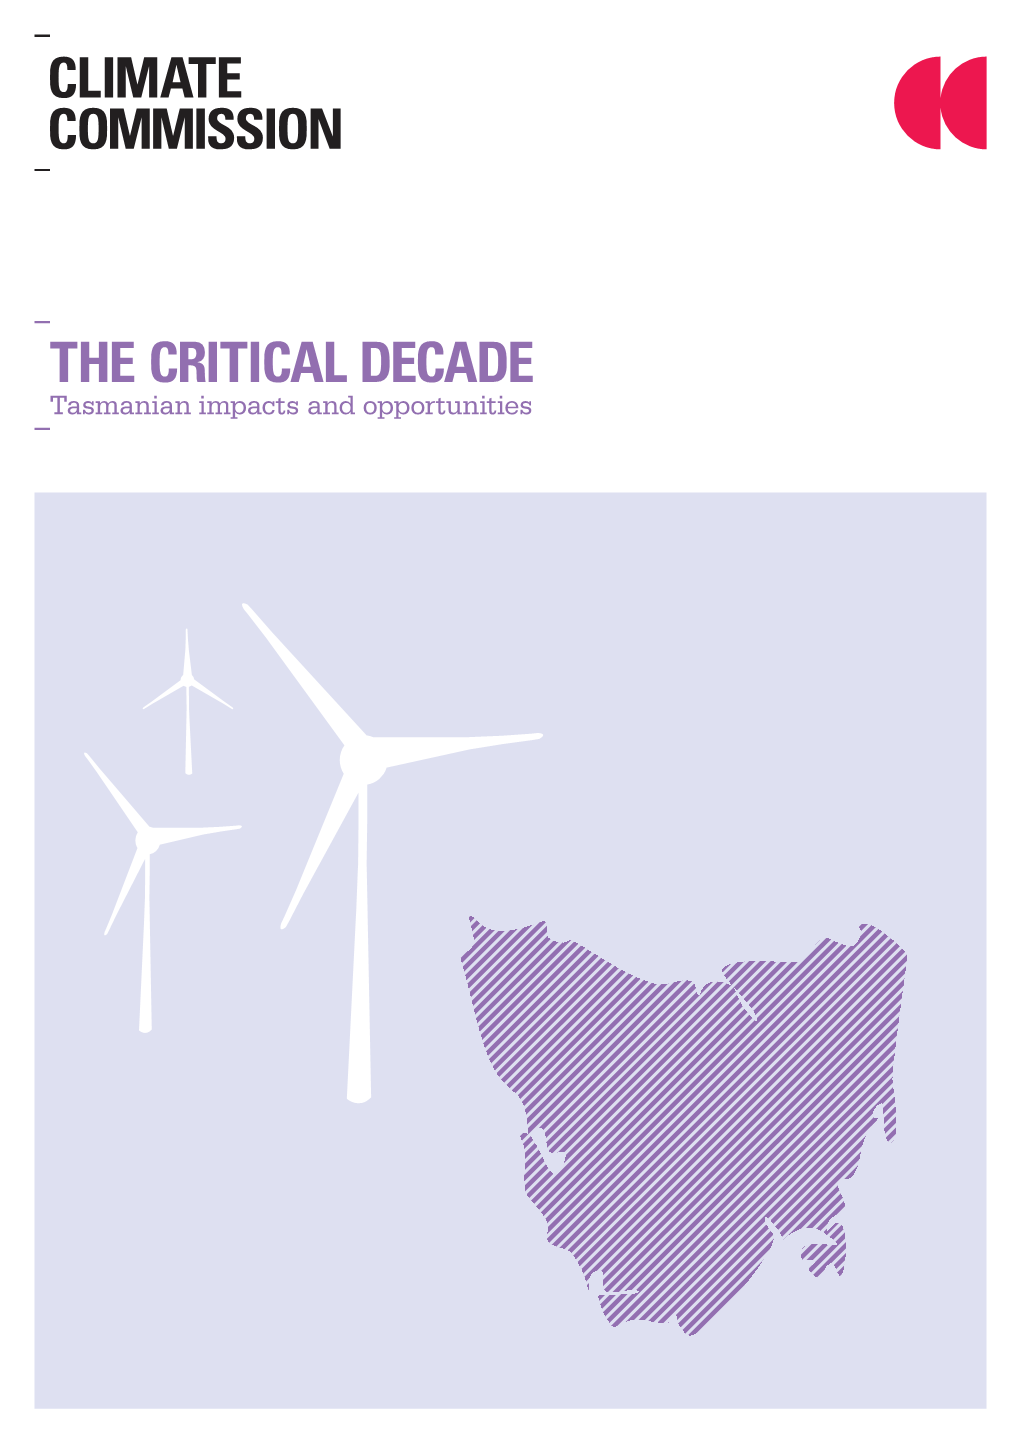 THE CRITICAL DECADE Tasmanian Impacts and Opportunities the Critical Decade: Tasmanian Impacts and Opportunities